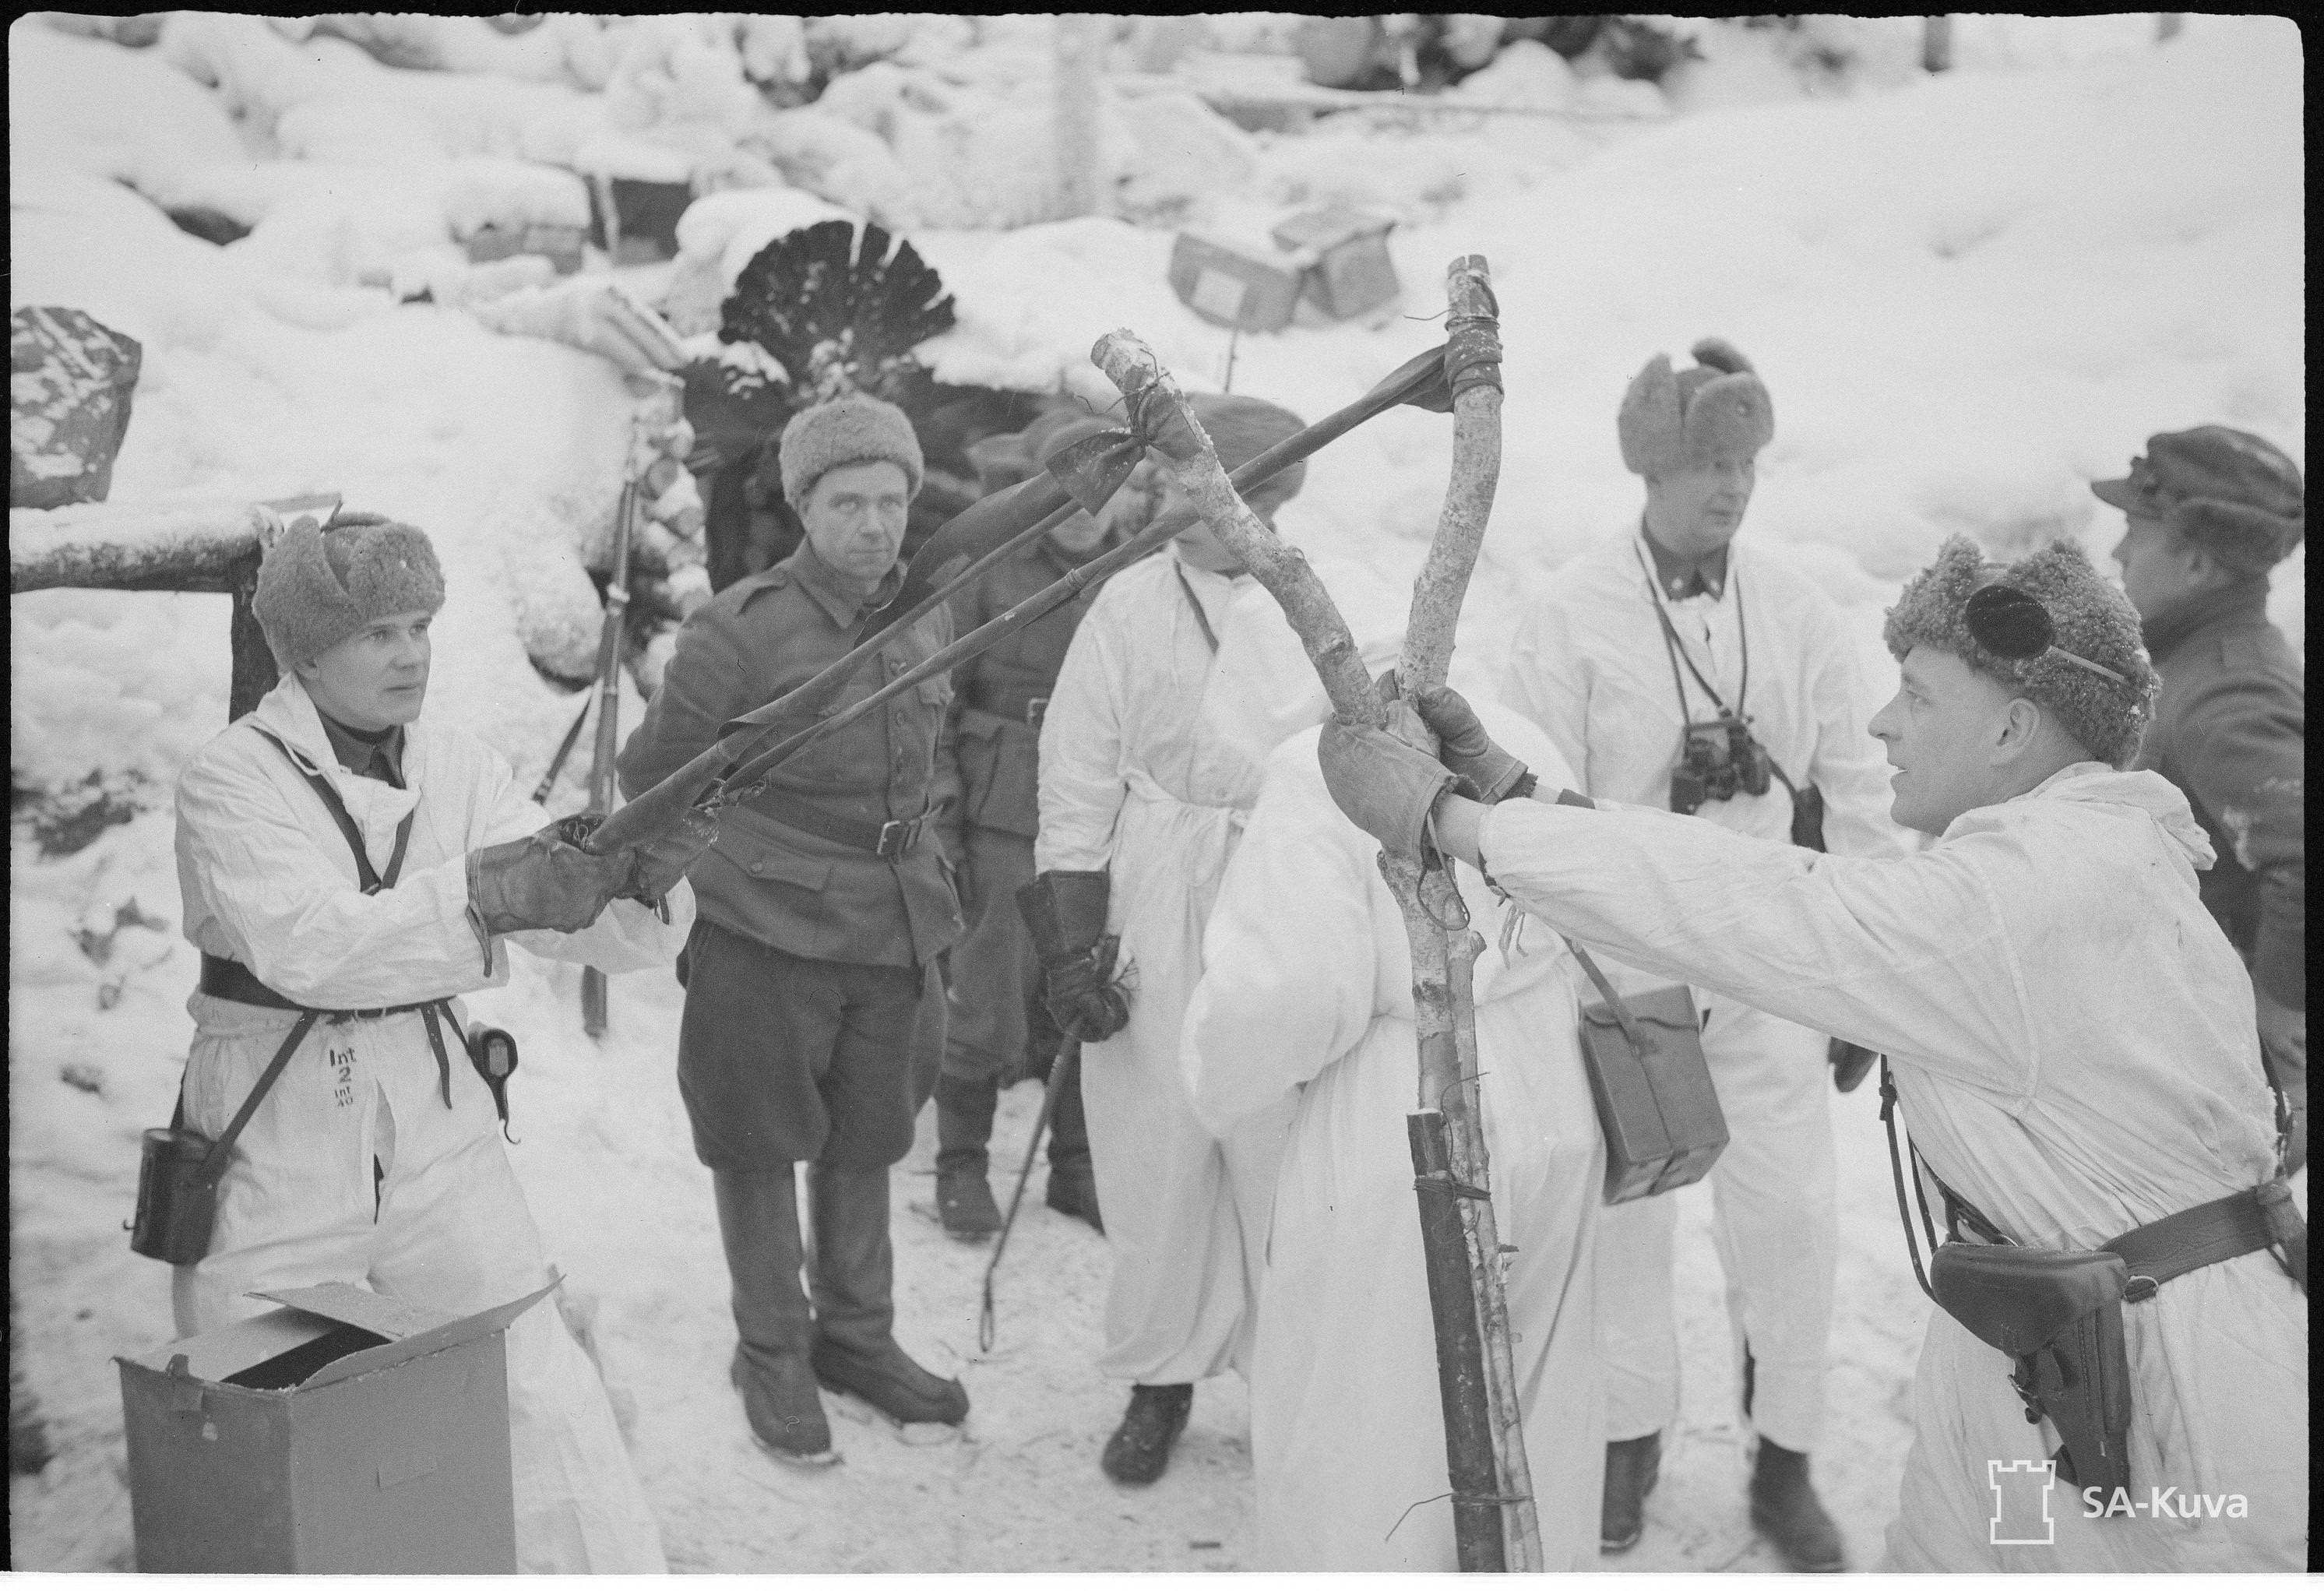 How the Finnish fired artillery at the Russians during blistering cold days during the Winter War in 1941.